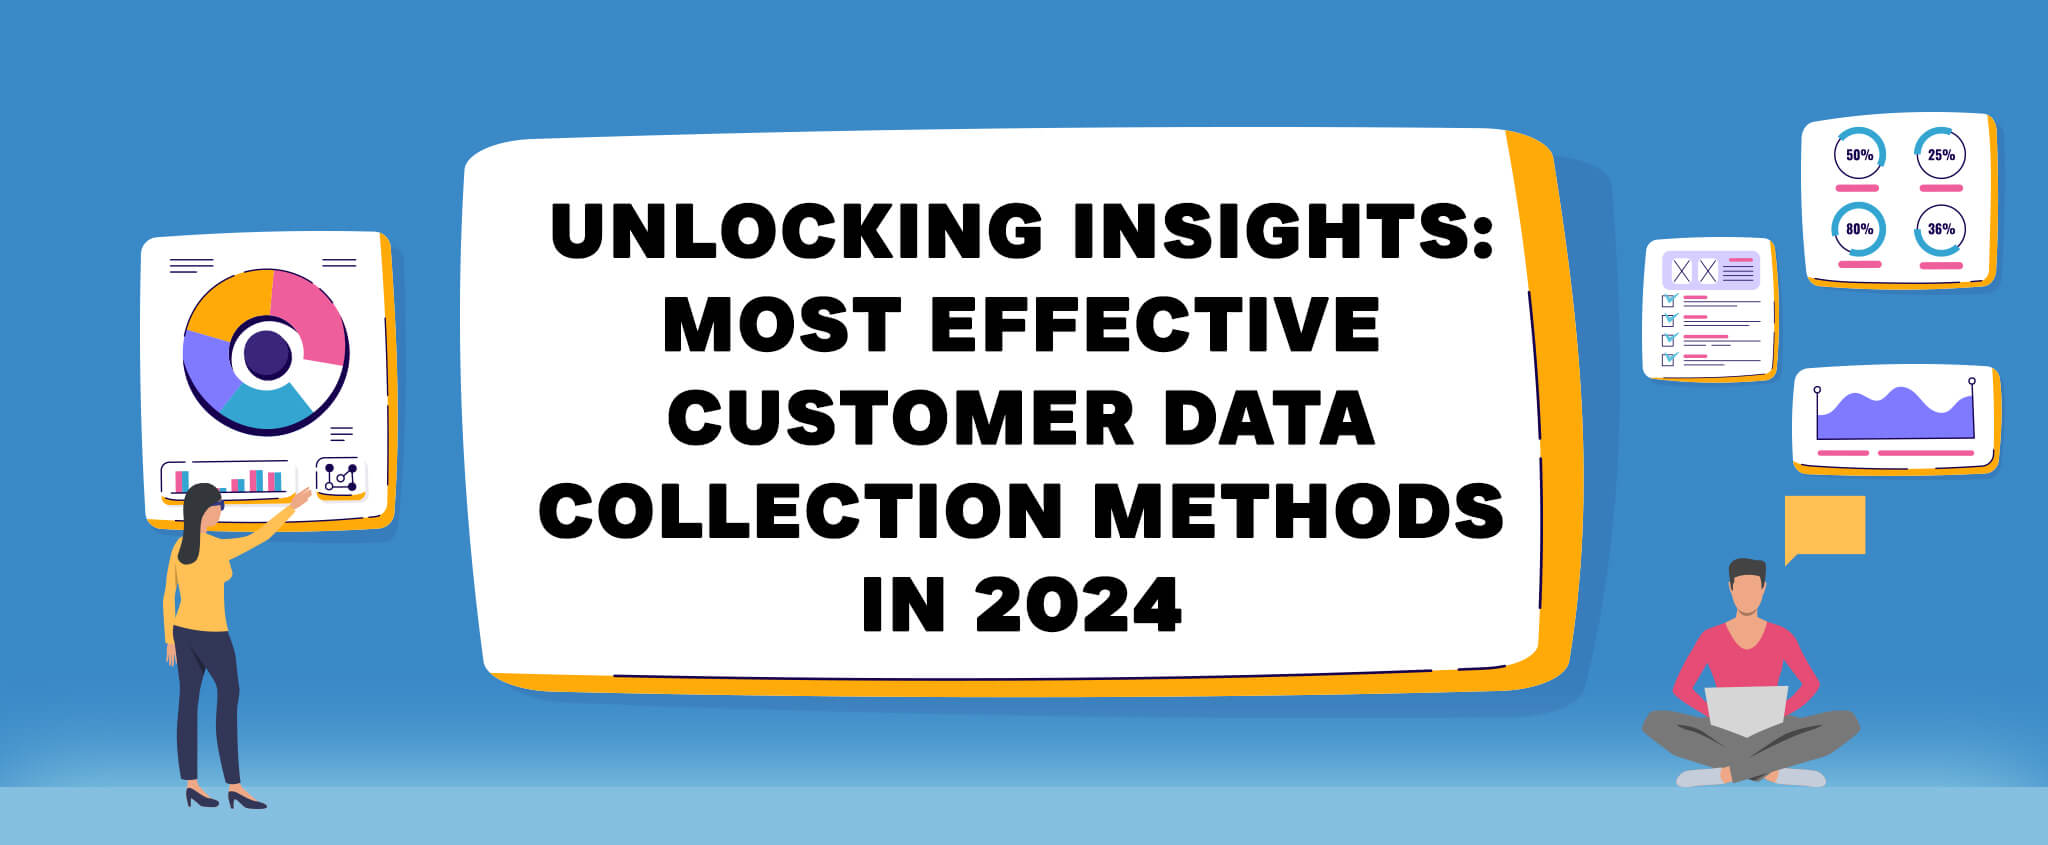 Unlocking Insights: Most Effective Customer Data Collection Methods in 2024